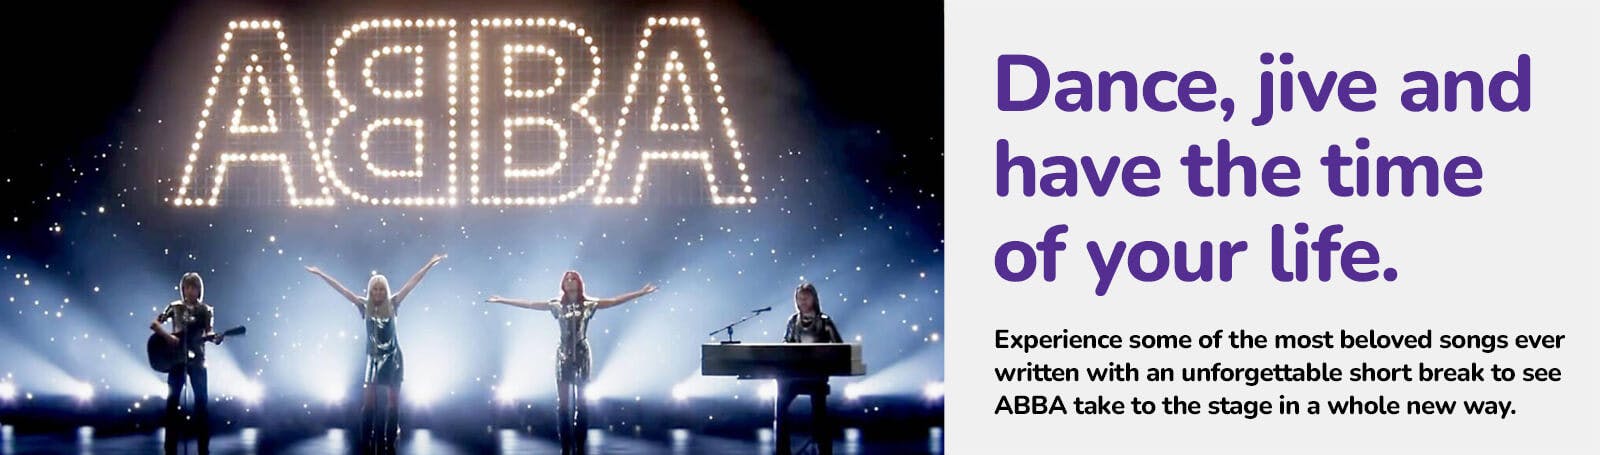 ABBA Voyage with Hotel Stay